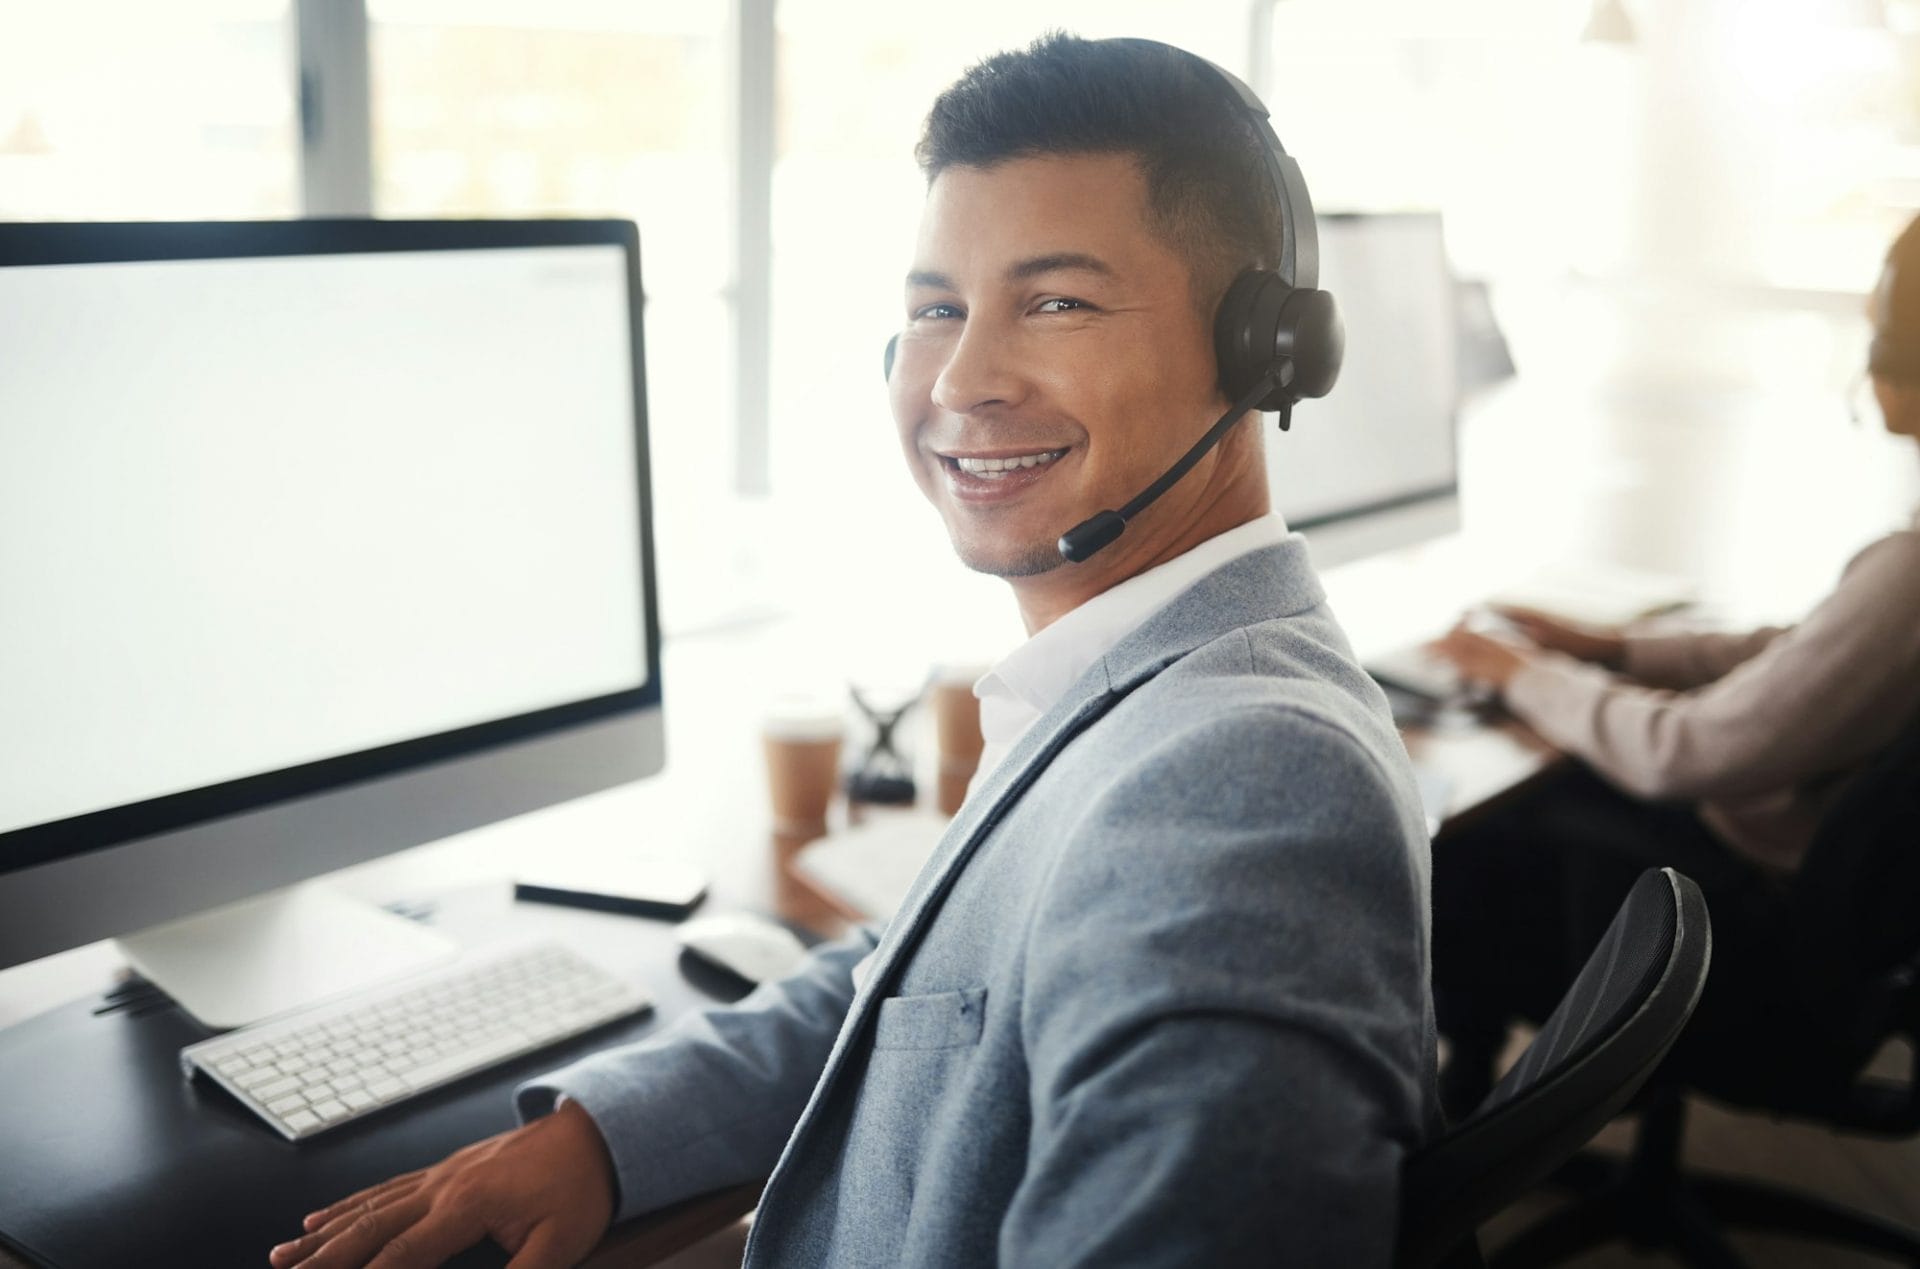 Call center computer, portrait consultant and man telemarketing sales on contact us CRM or telecom